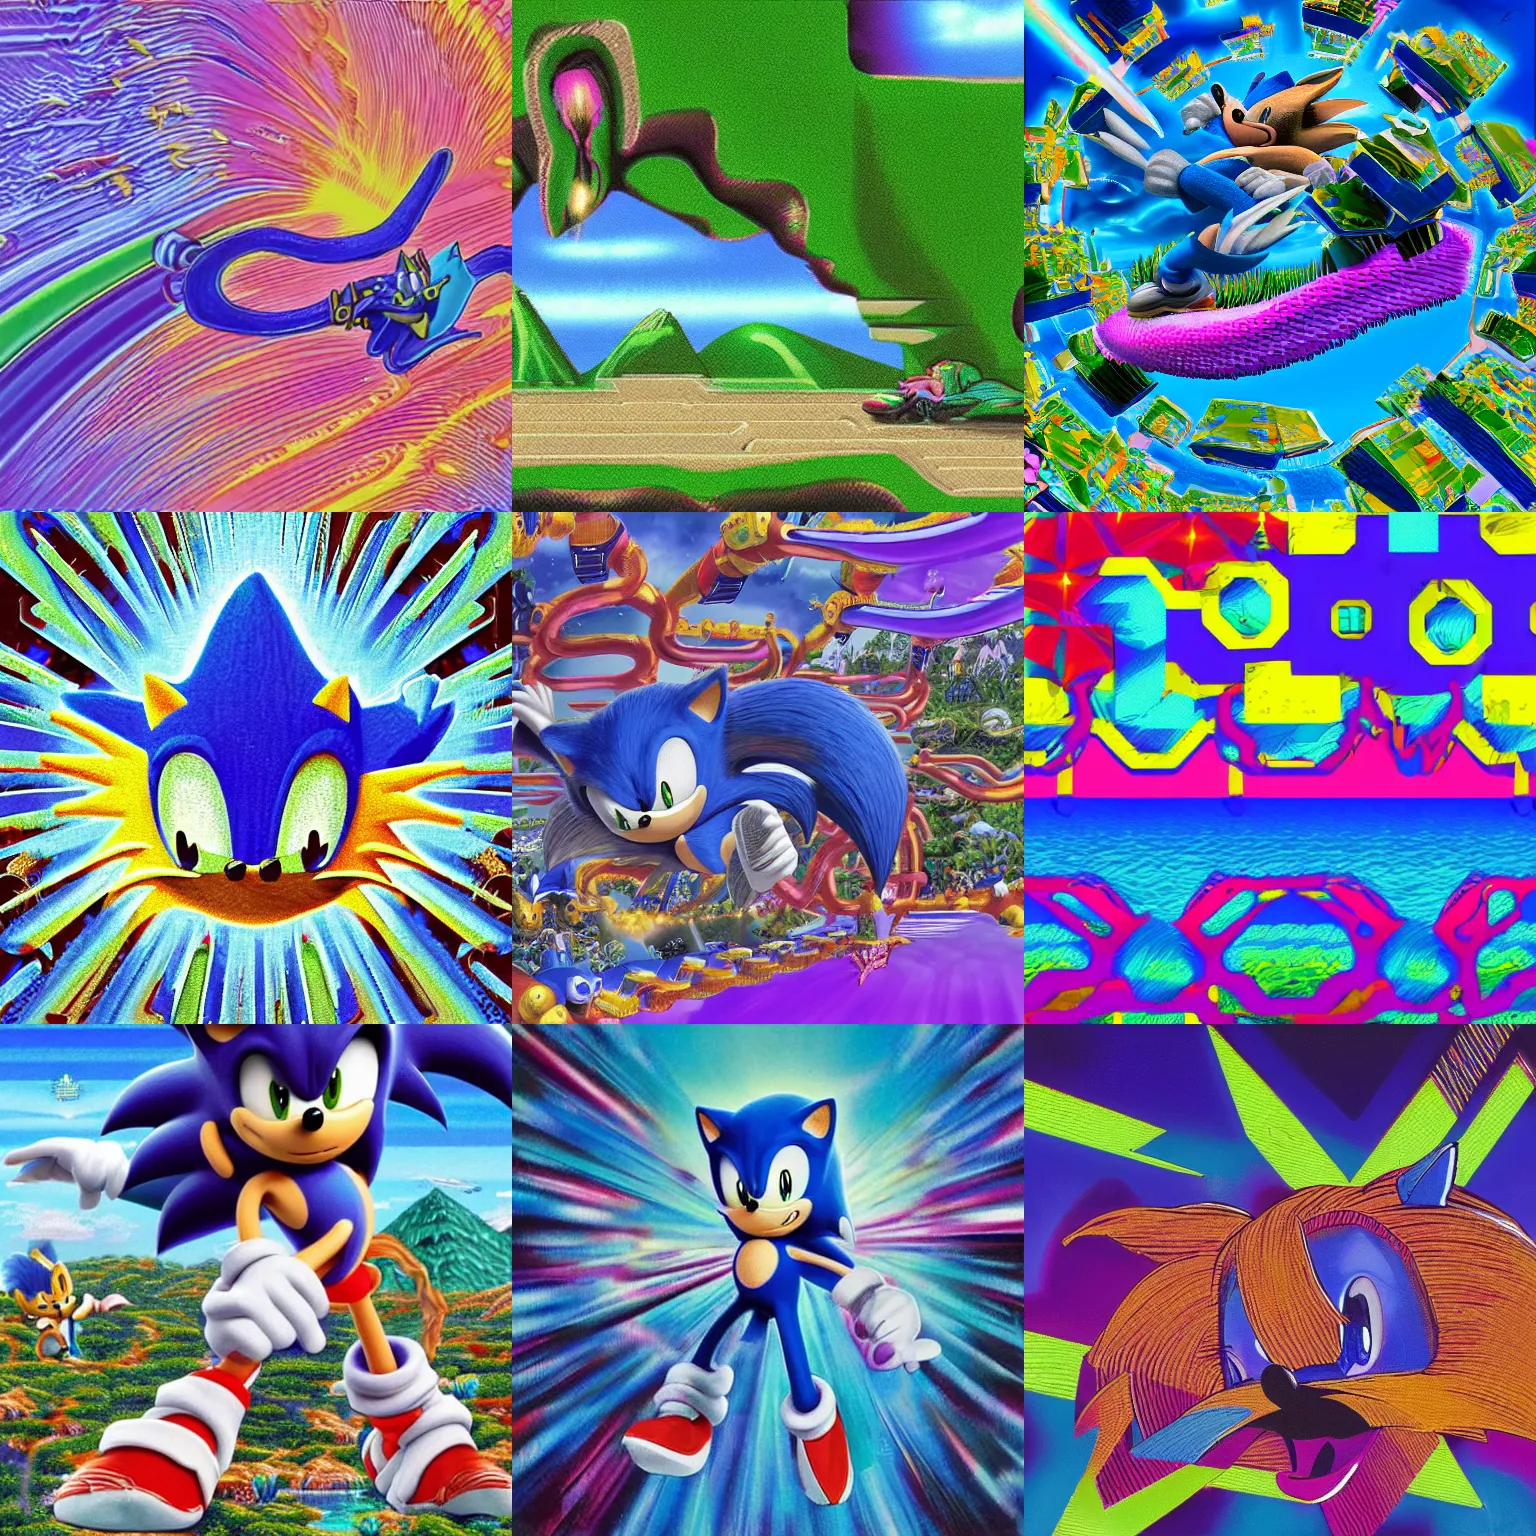 Prompt: sonic the hedgehog close up in a recursive surreal, sharp, detailed professional, high quality airbrush art MGMT tame impala album cover of a liquid dissolving synthwave vaporwave LSD DMT blue sonic the hedgehog surfing through terragen landscape, purple checkerboard plane, 1990s 1992 Sega Genesis video game album cover,